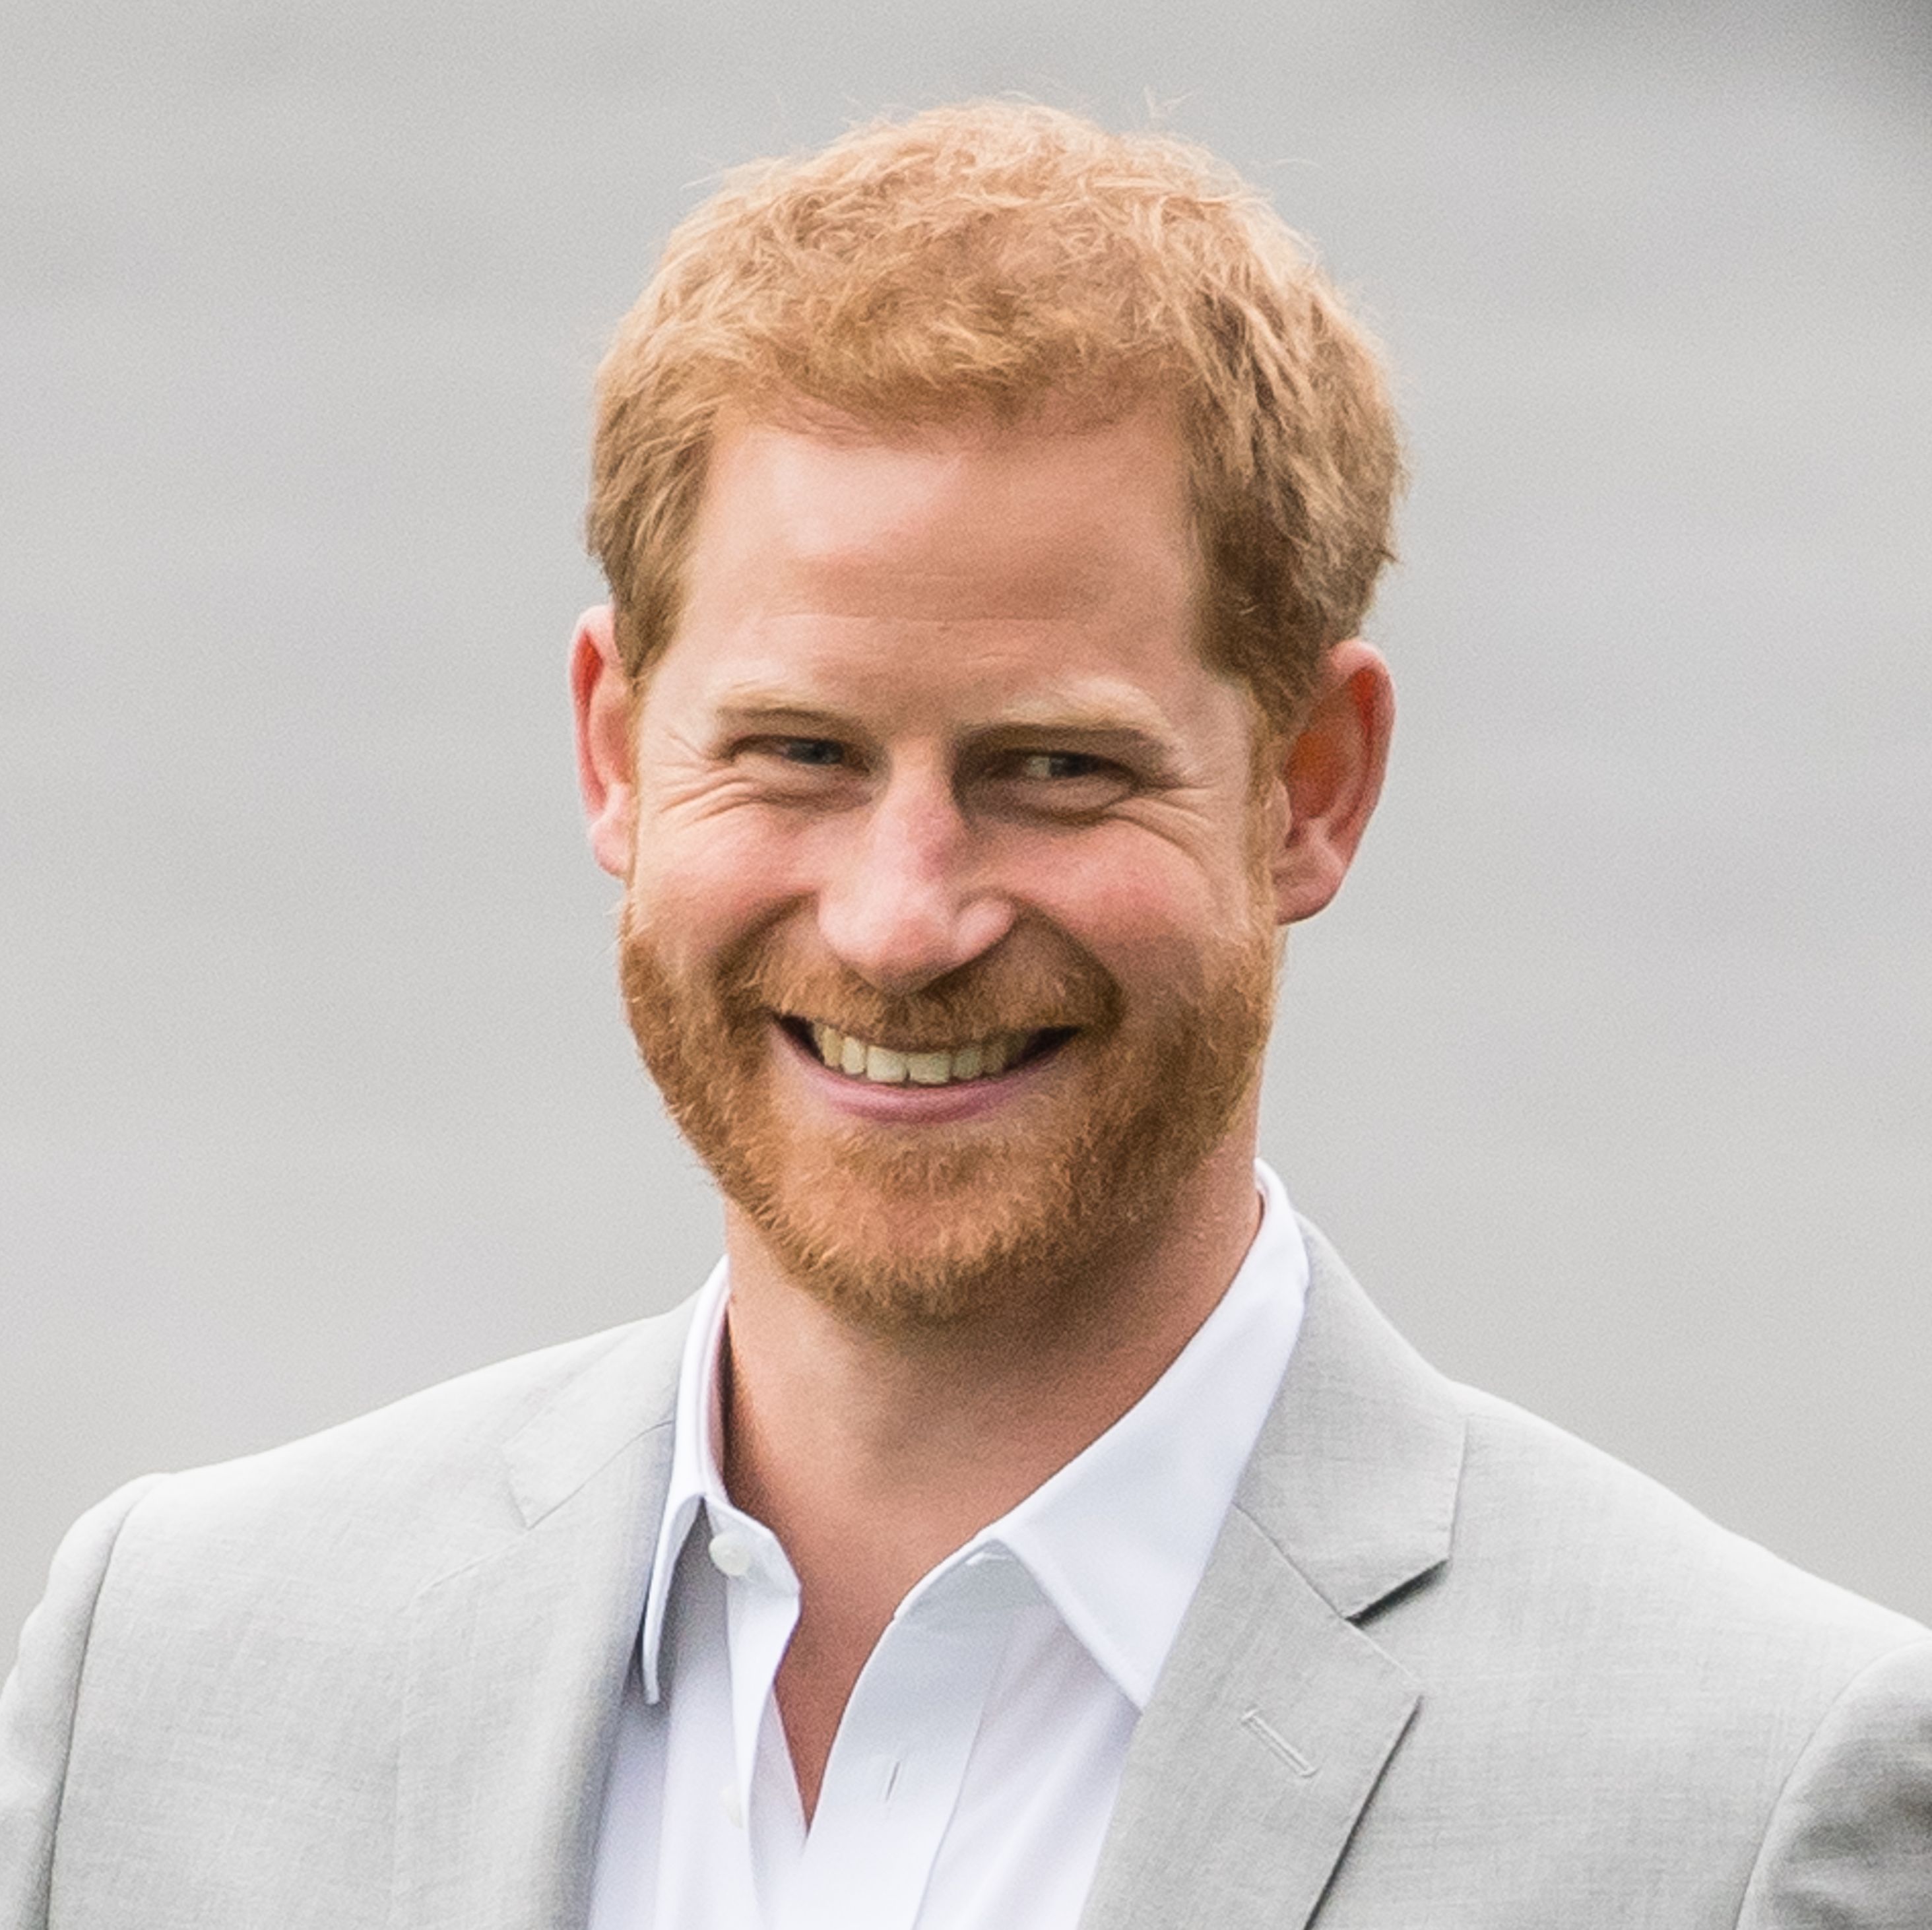 Prince Harry Snubs Royals, Thanks a Buncha Celebs and His Family in Acknowledgements of 'Spare'